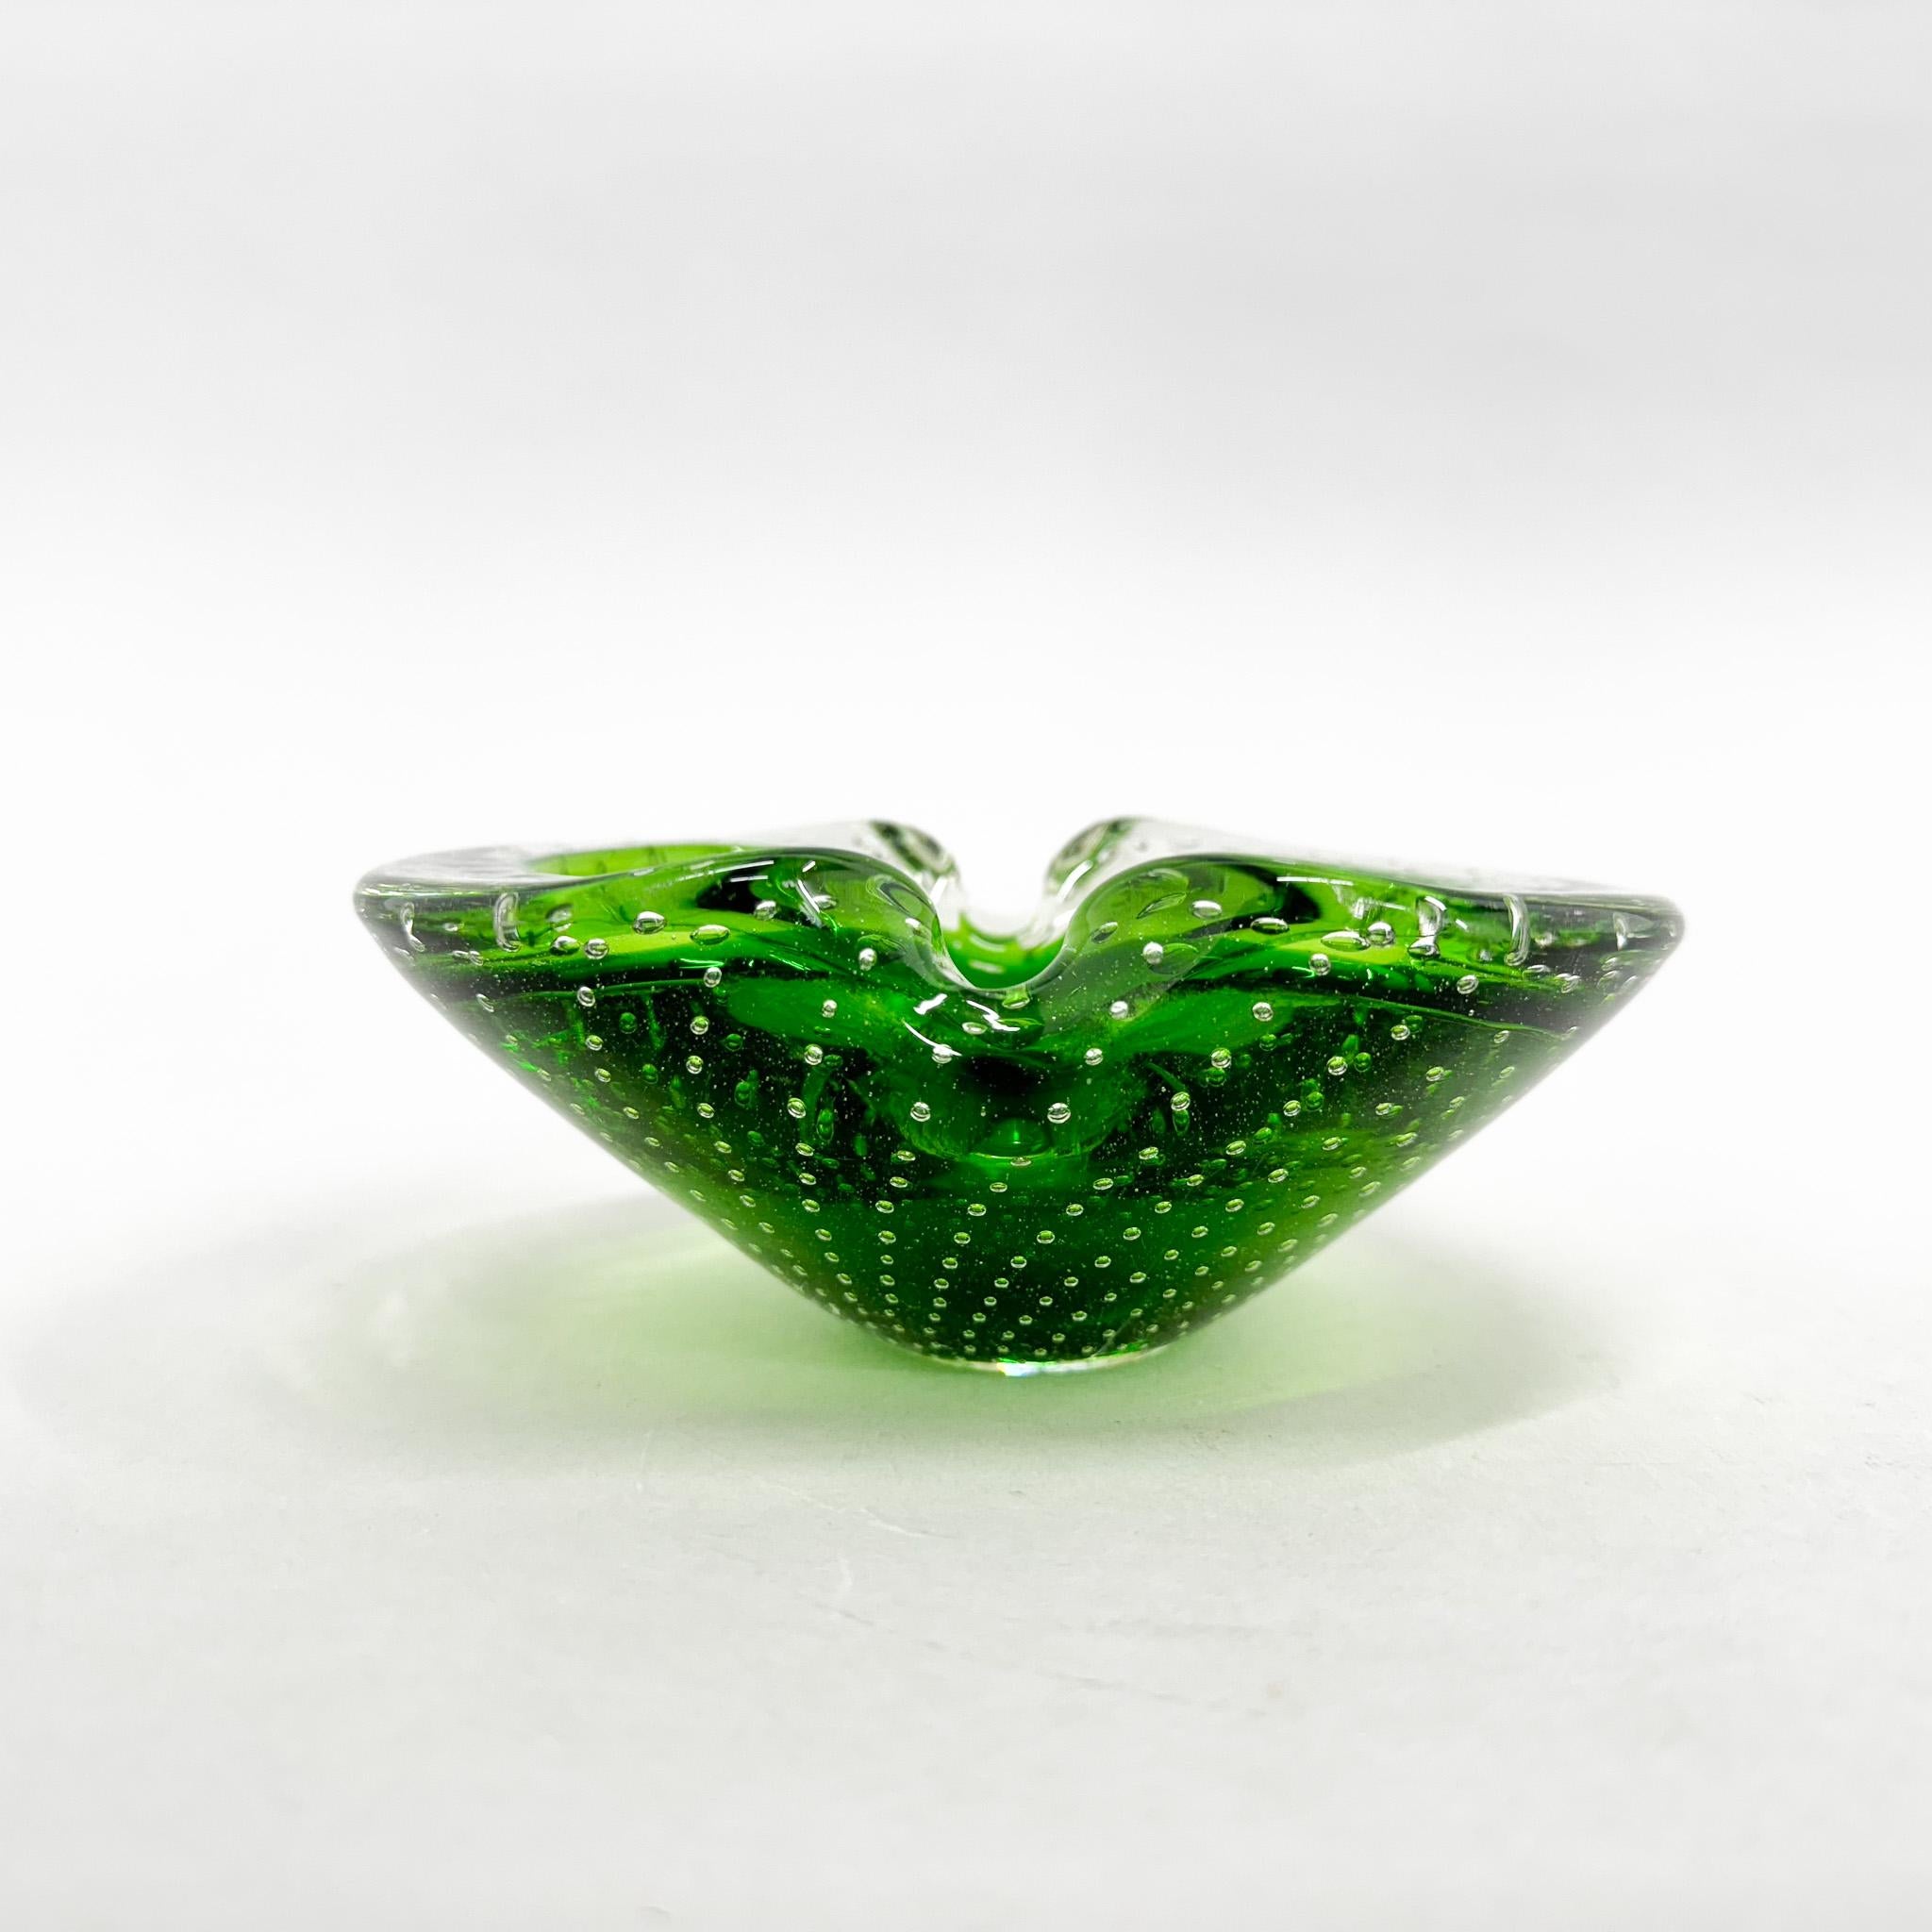 Vintage art glass ashtray, designed by Hana Machovska and produced by Mstisov Glassworks in the former Czechoslovakia in the 1970s. Beautiful green colour with bubbles inside. Good vintage condition with some scratches, that can be seen on the